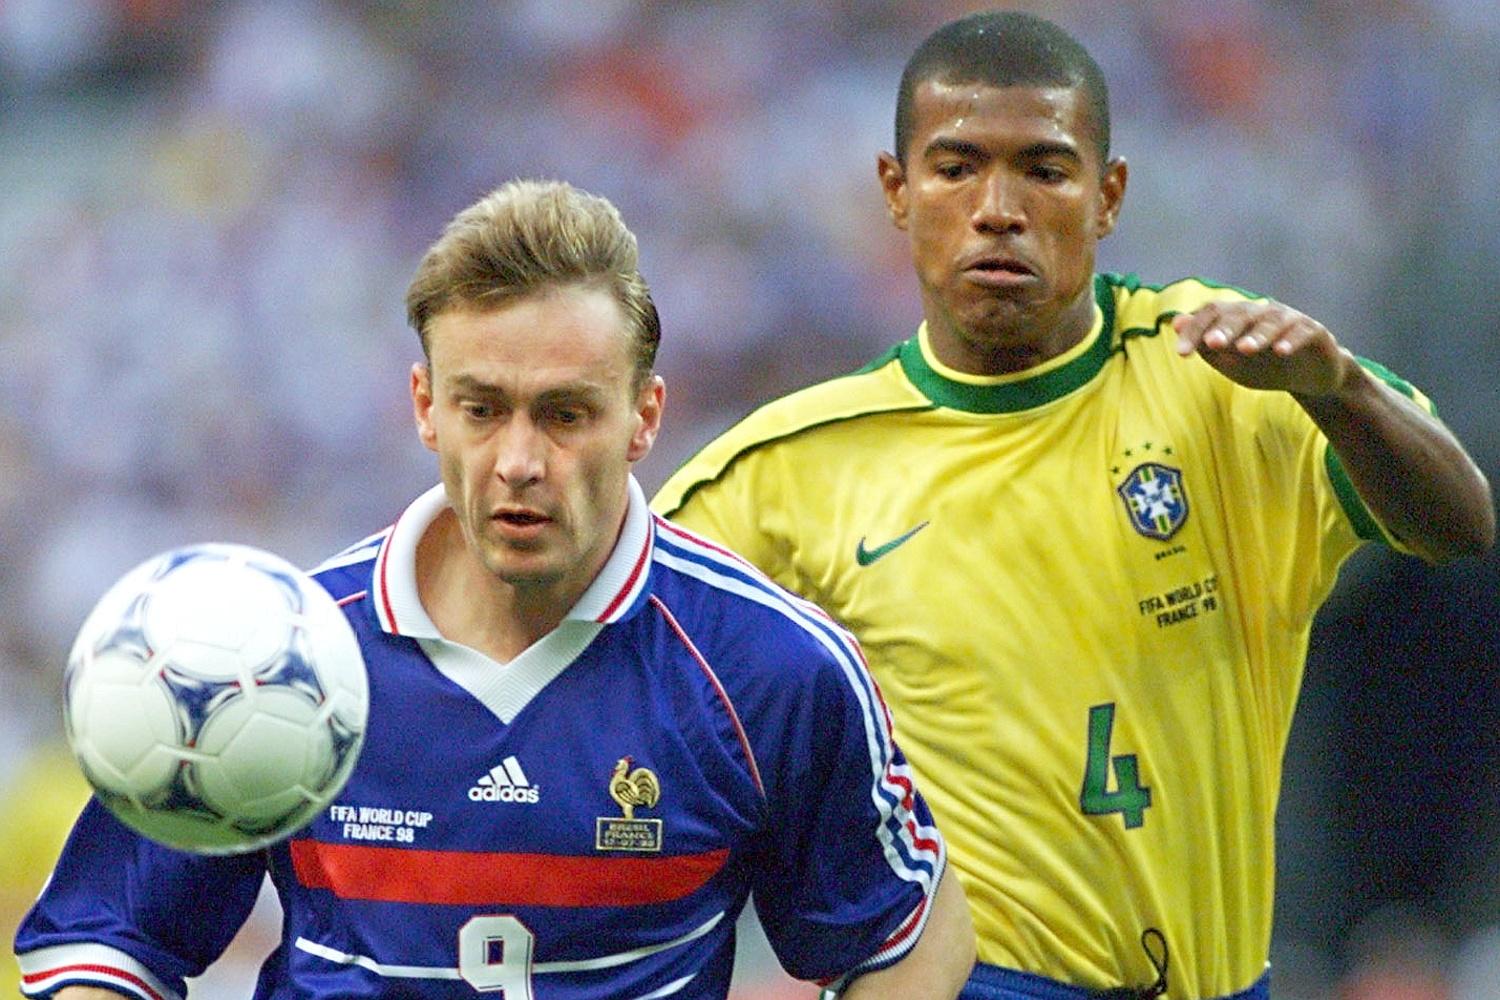 Stephen Guivarc'h is the France striker who won the World Cup 1998 title without scoring a single goal in the process. A true !World Cup One-Hit Wonder